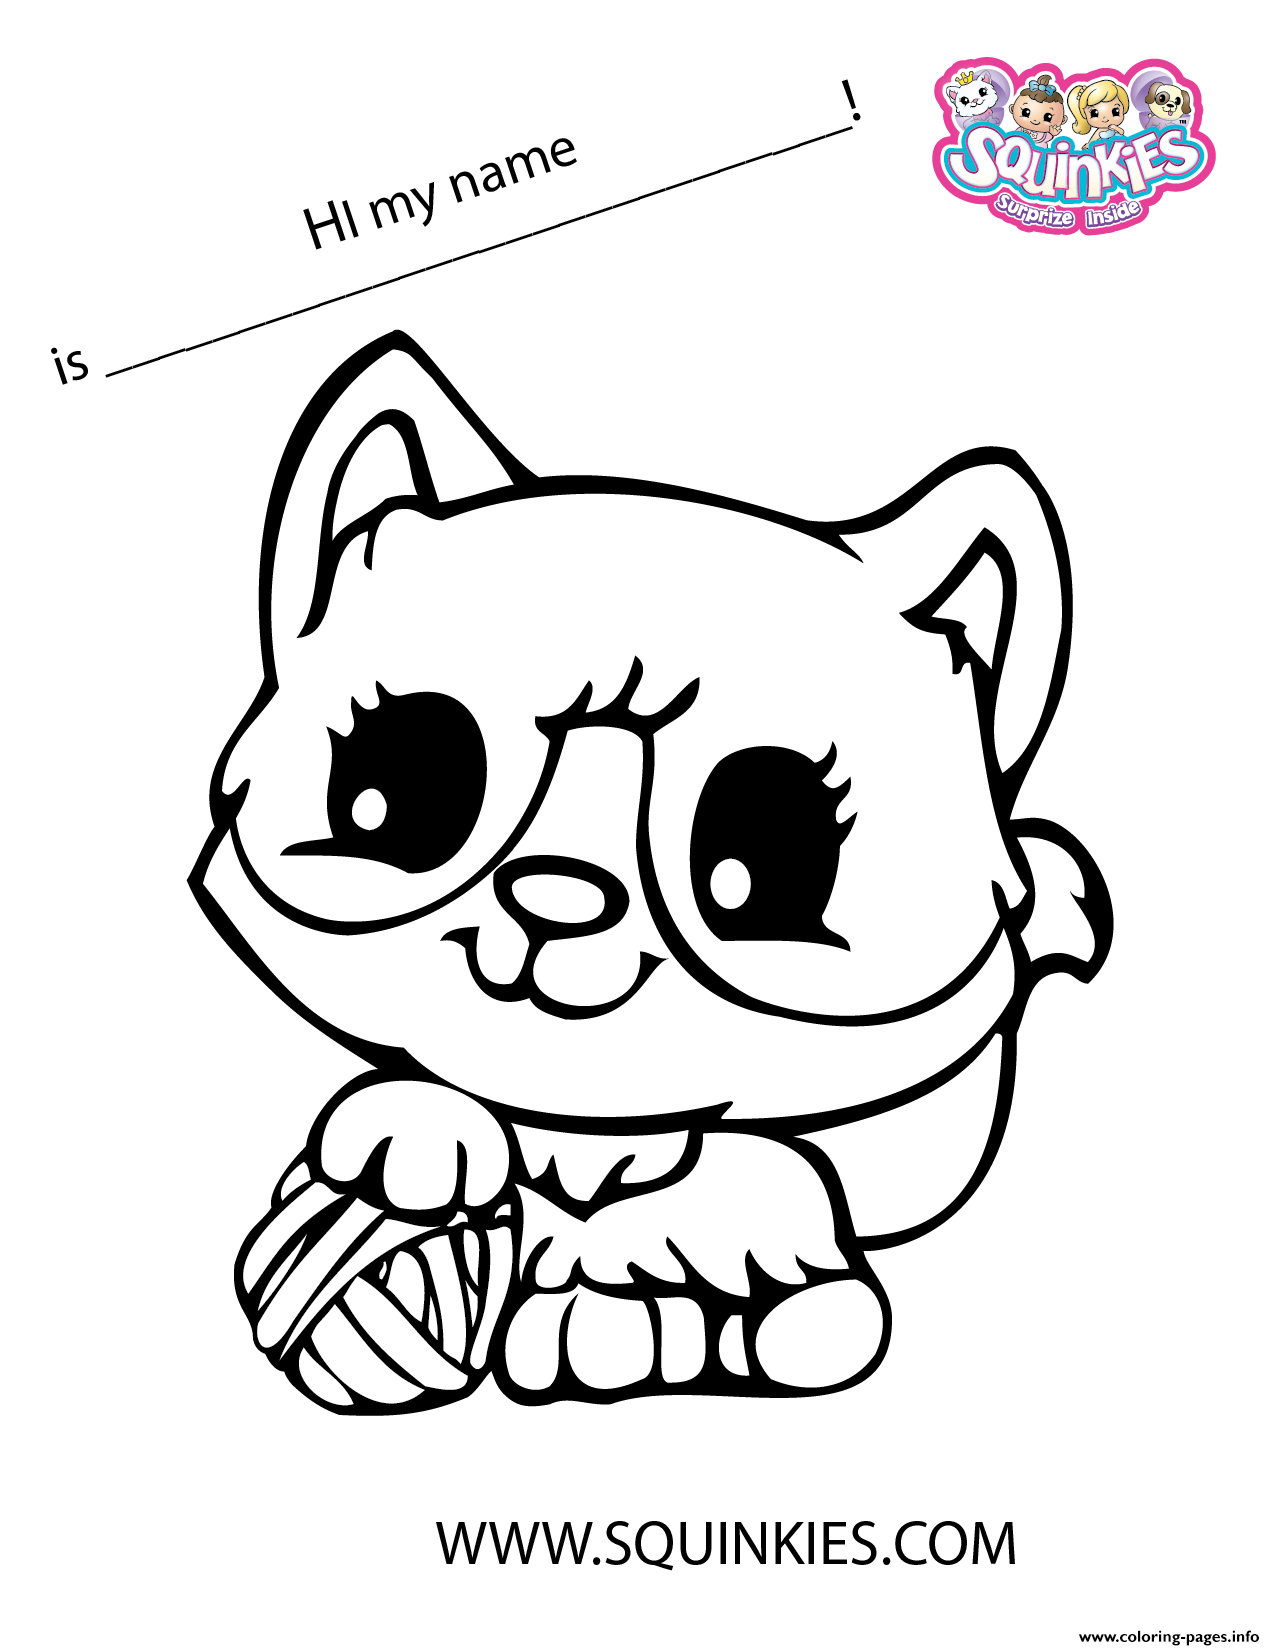 Squinkies Official Cat coloring